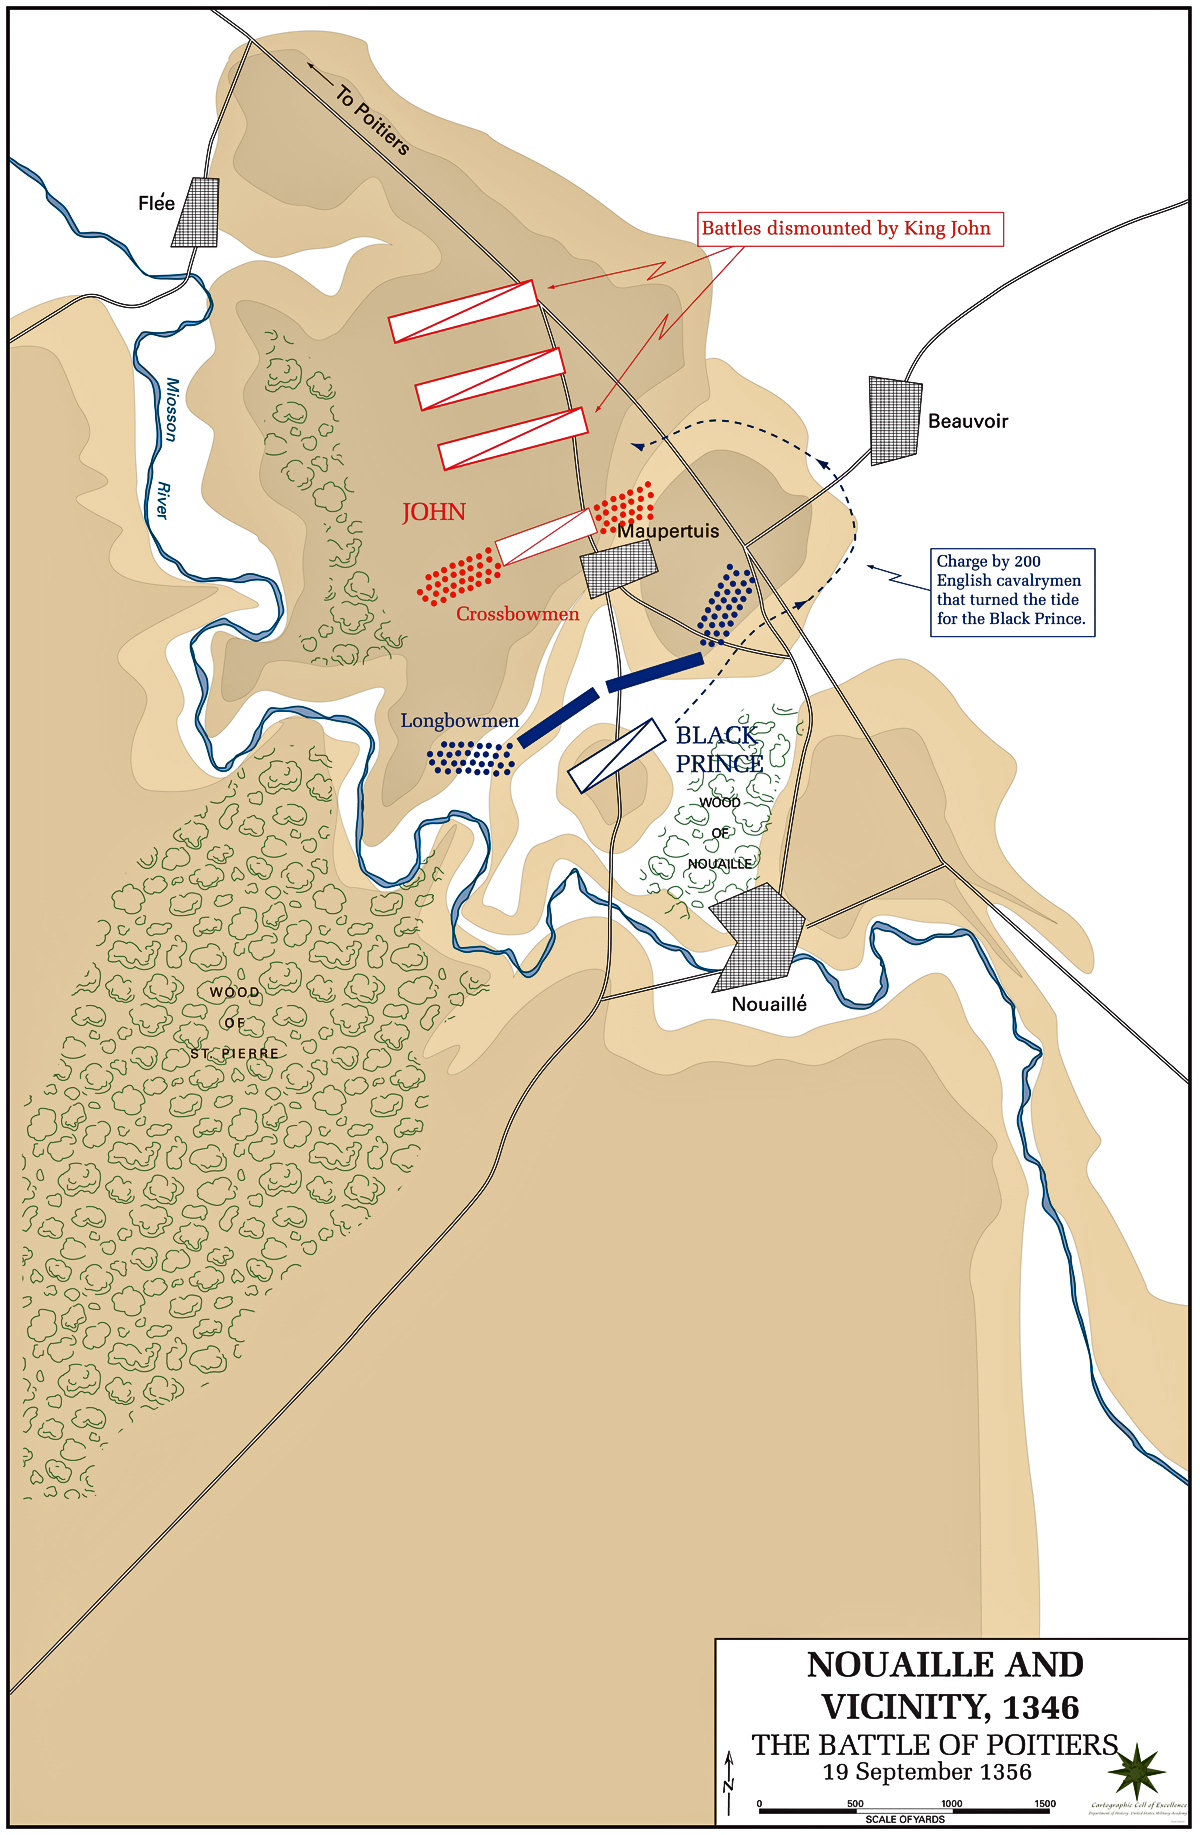 Map of the Battle of Poitiers - September 19, 1356